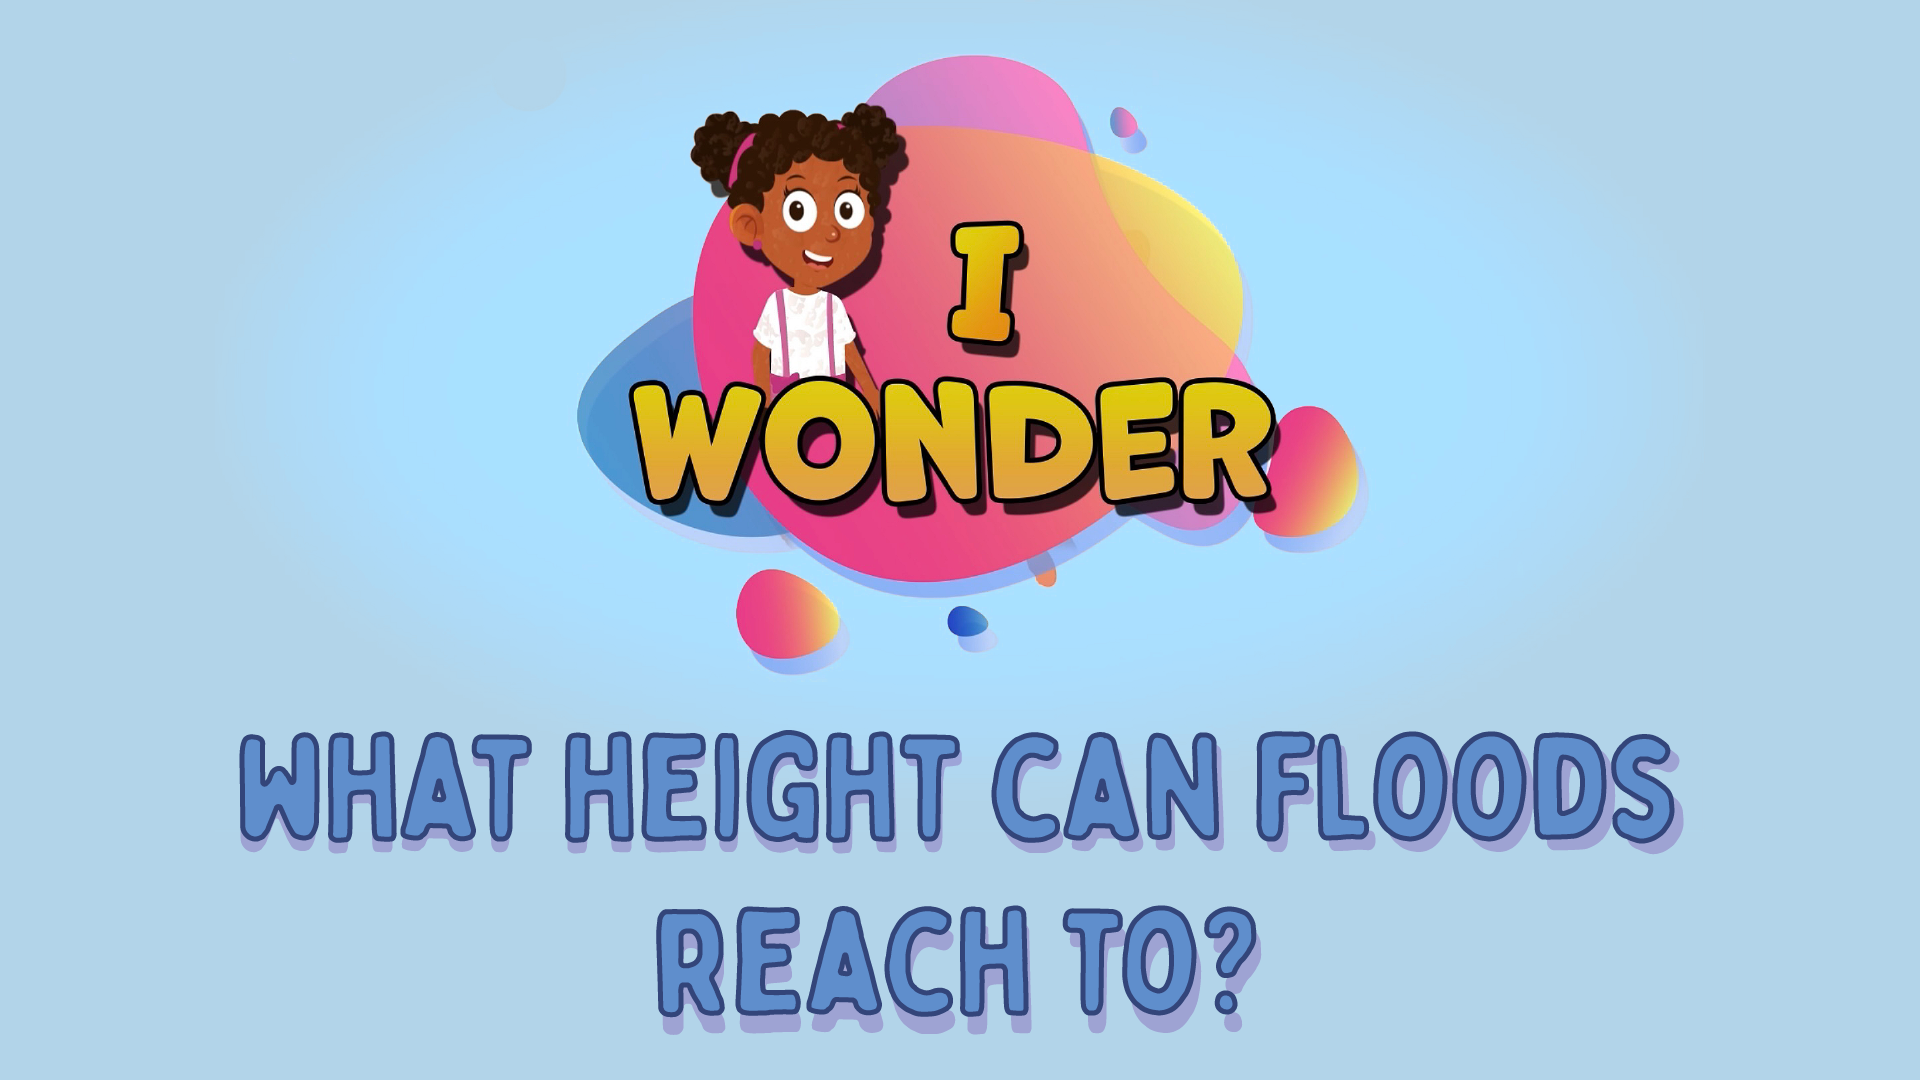 What Heights Can Floods Reach?